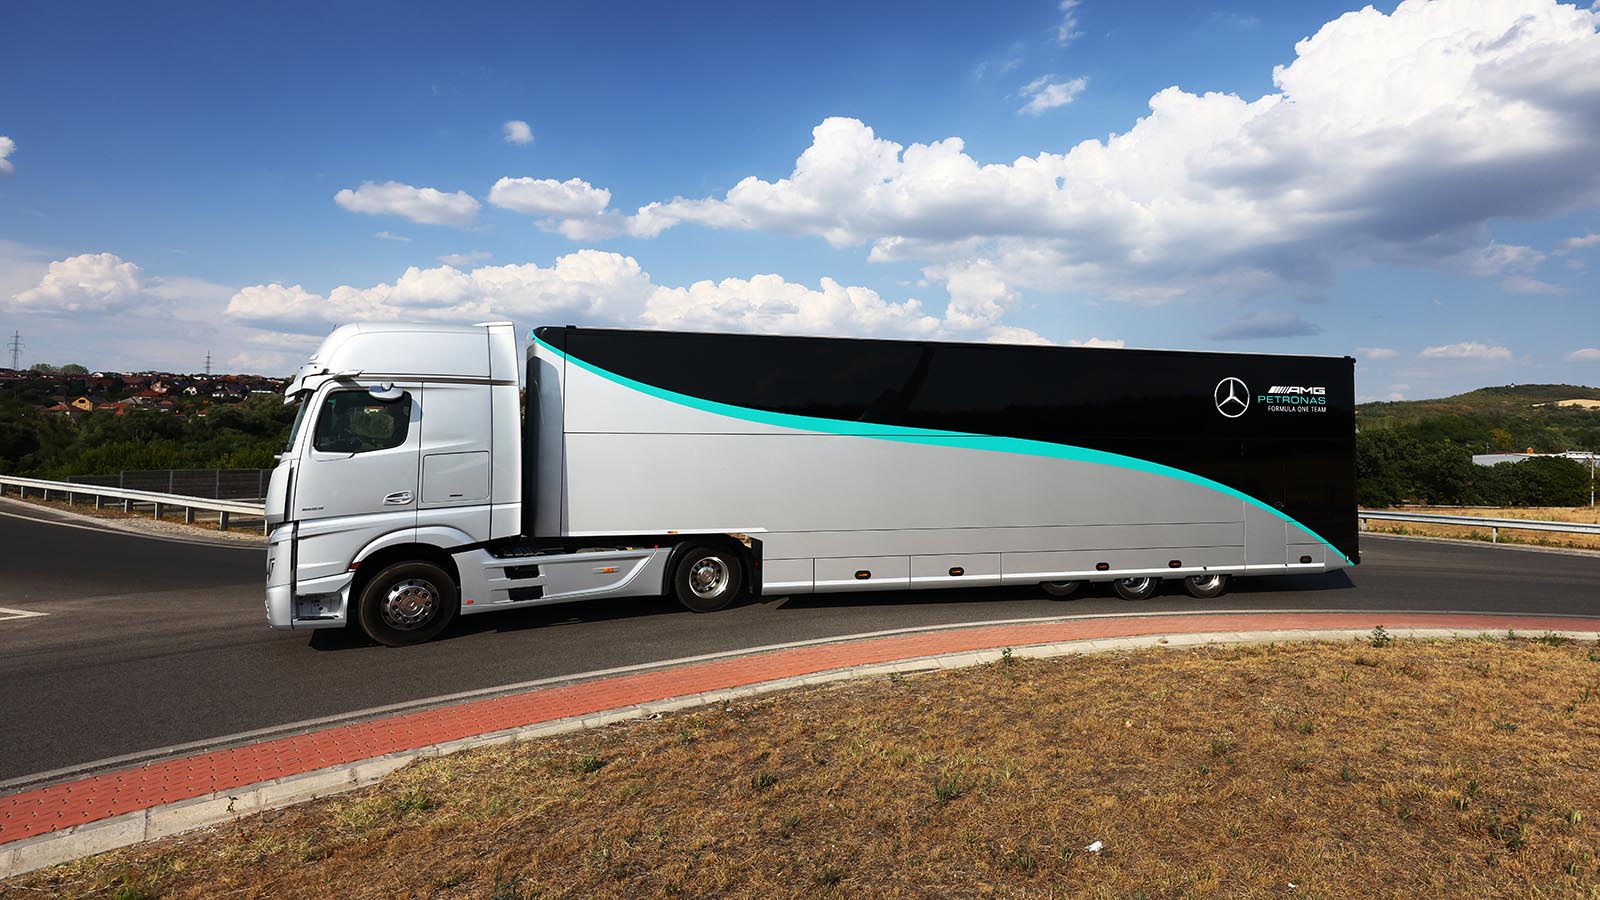 Mercedes freight truck at the Hungarian Grand Prix. July 2022